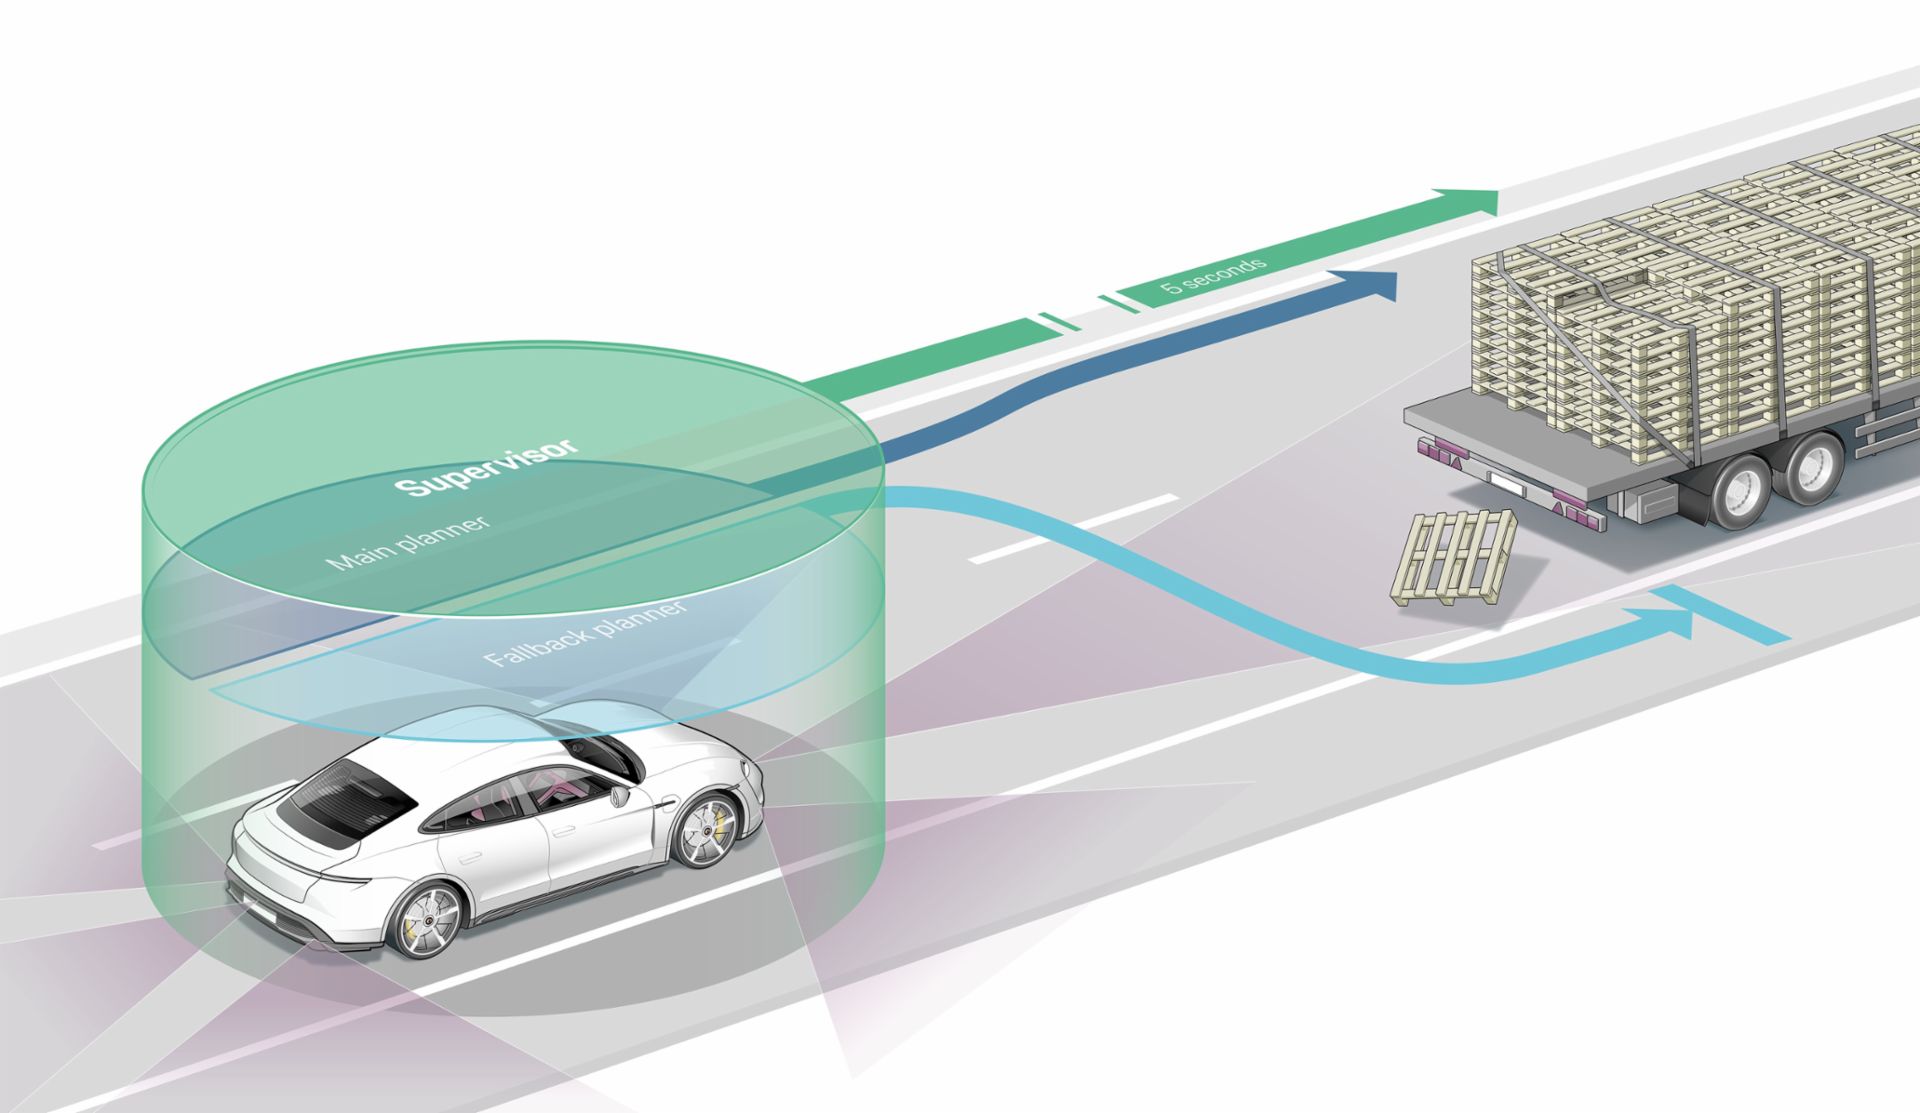 Autonomous driving safety: parallel systems and redundancy will keep us out of danger